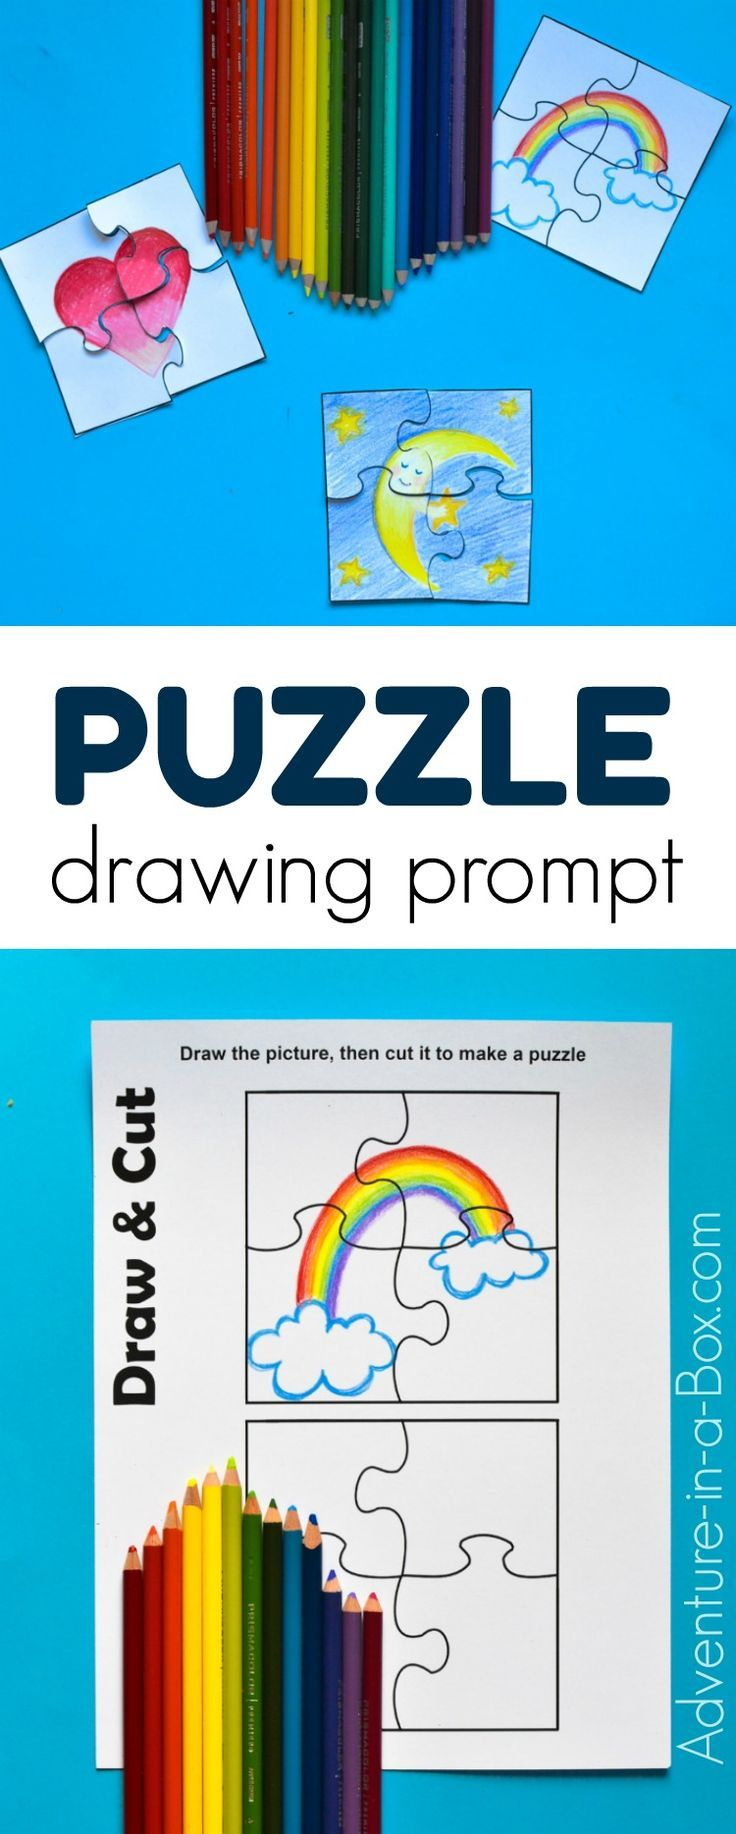 Puzzle Drawing Prompt For Kids With A Free Printable Template | Free - Printable Drawing Puzzles